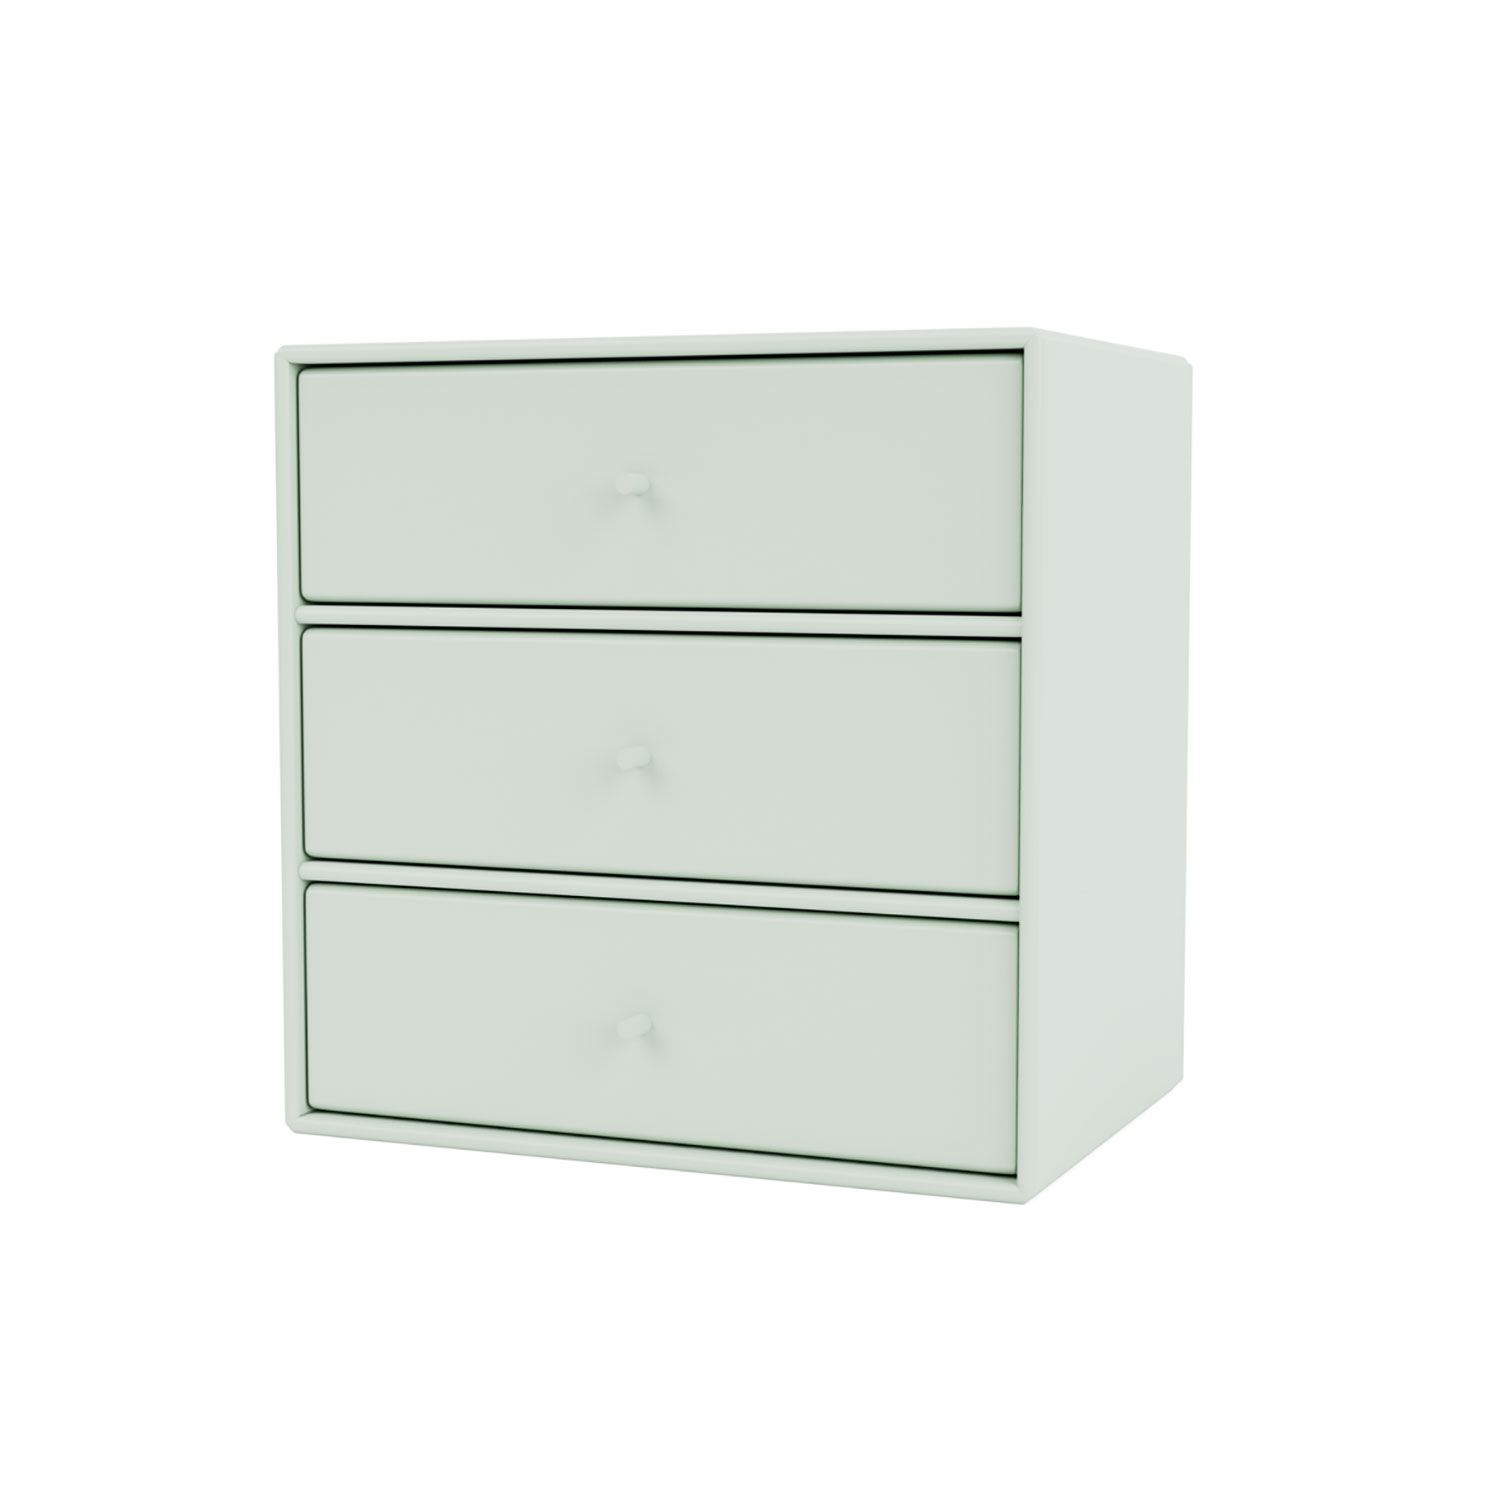 Mini 1007 with three drawers, 9 colors